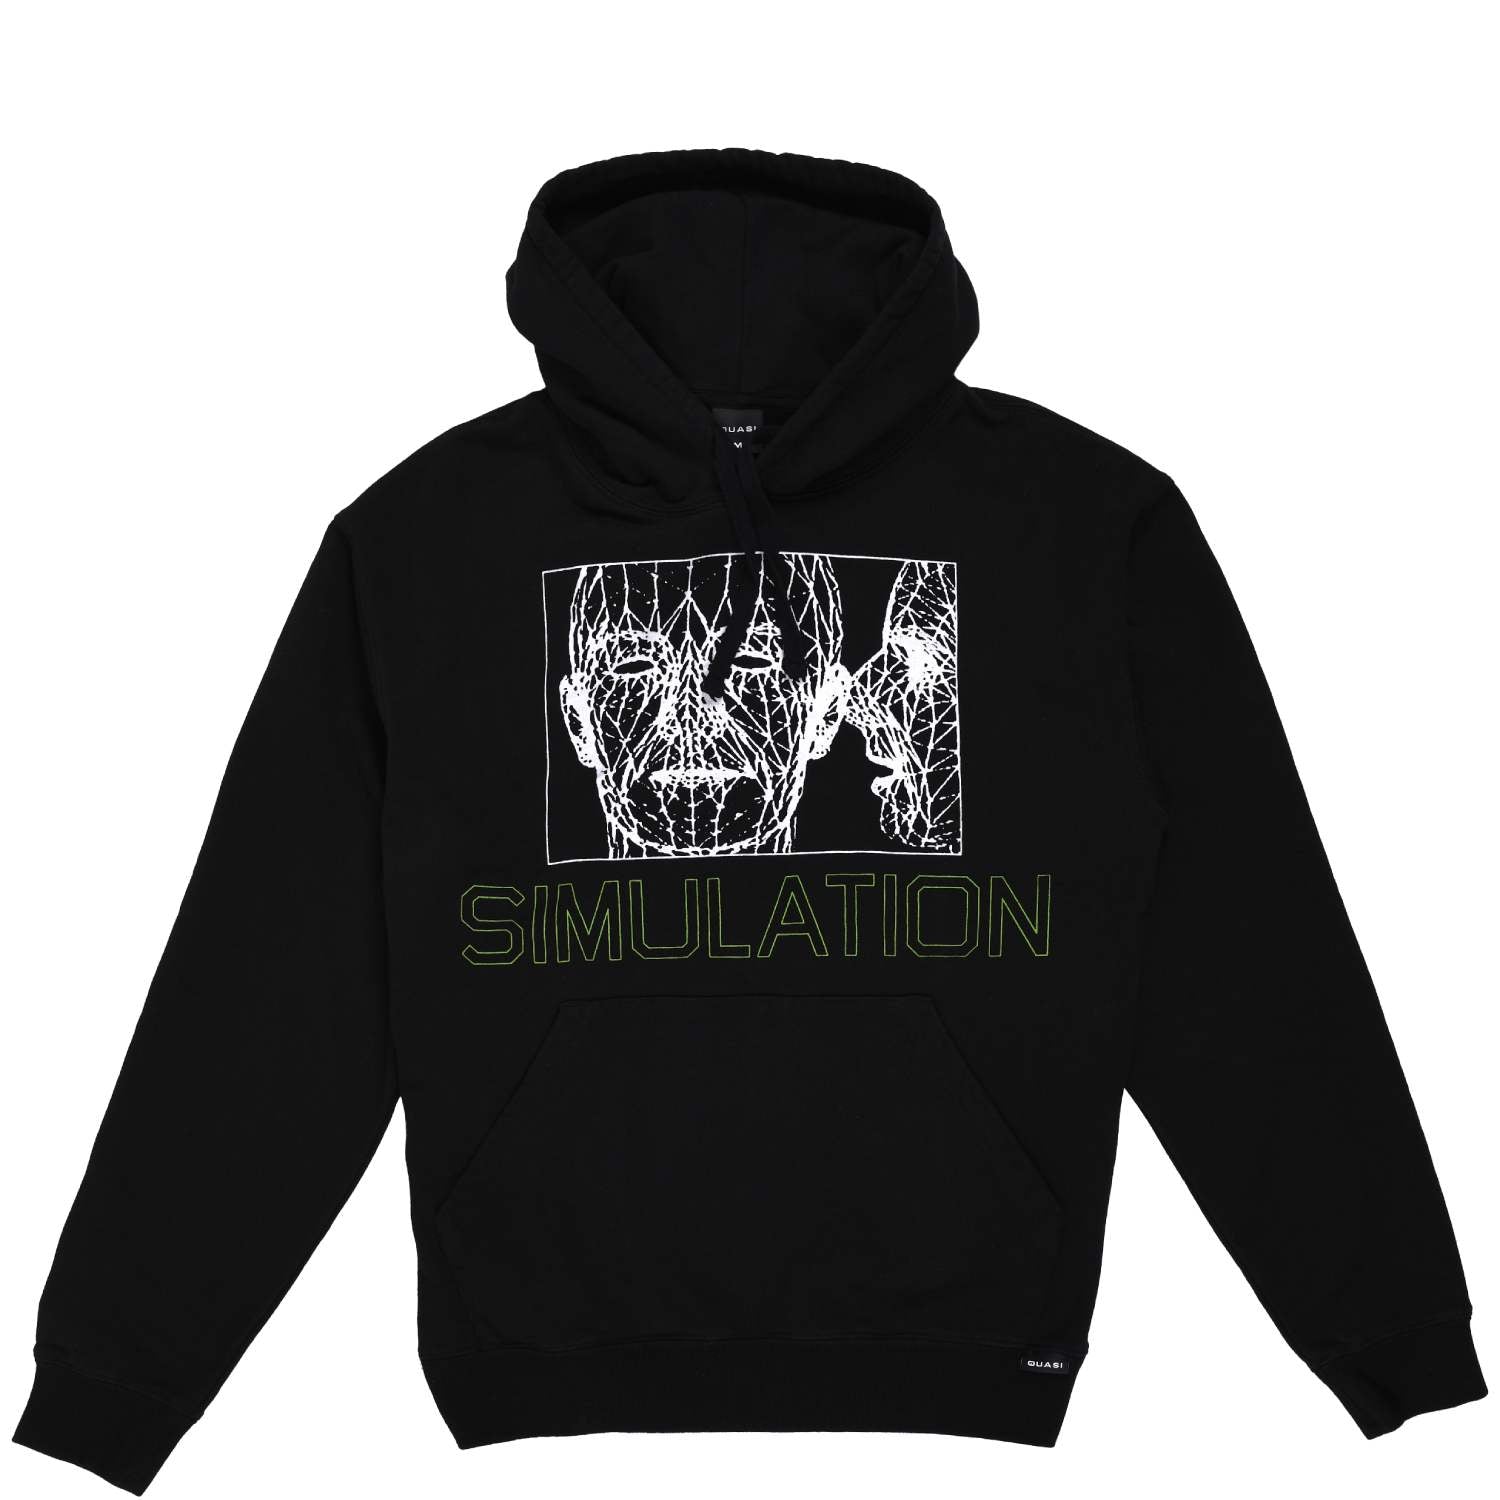 Athletic fit for comfortable wear, Quasi presents a midweight hoodie with 11oz jersey fleece fabric. It features flat woven hood drawstrings and a screen printed chest design in white. Design appears to be hand drawn. Simulation is printed on the front of the hoodie in green.